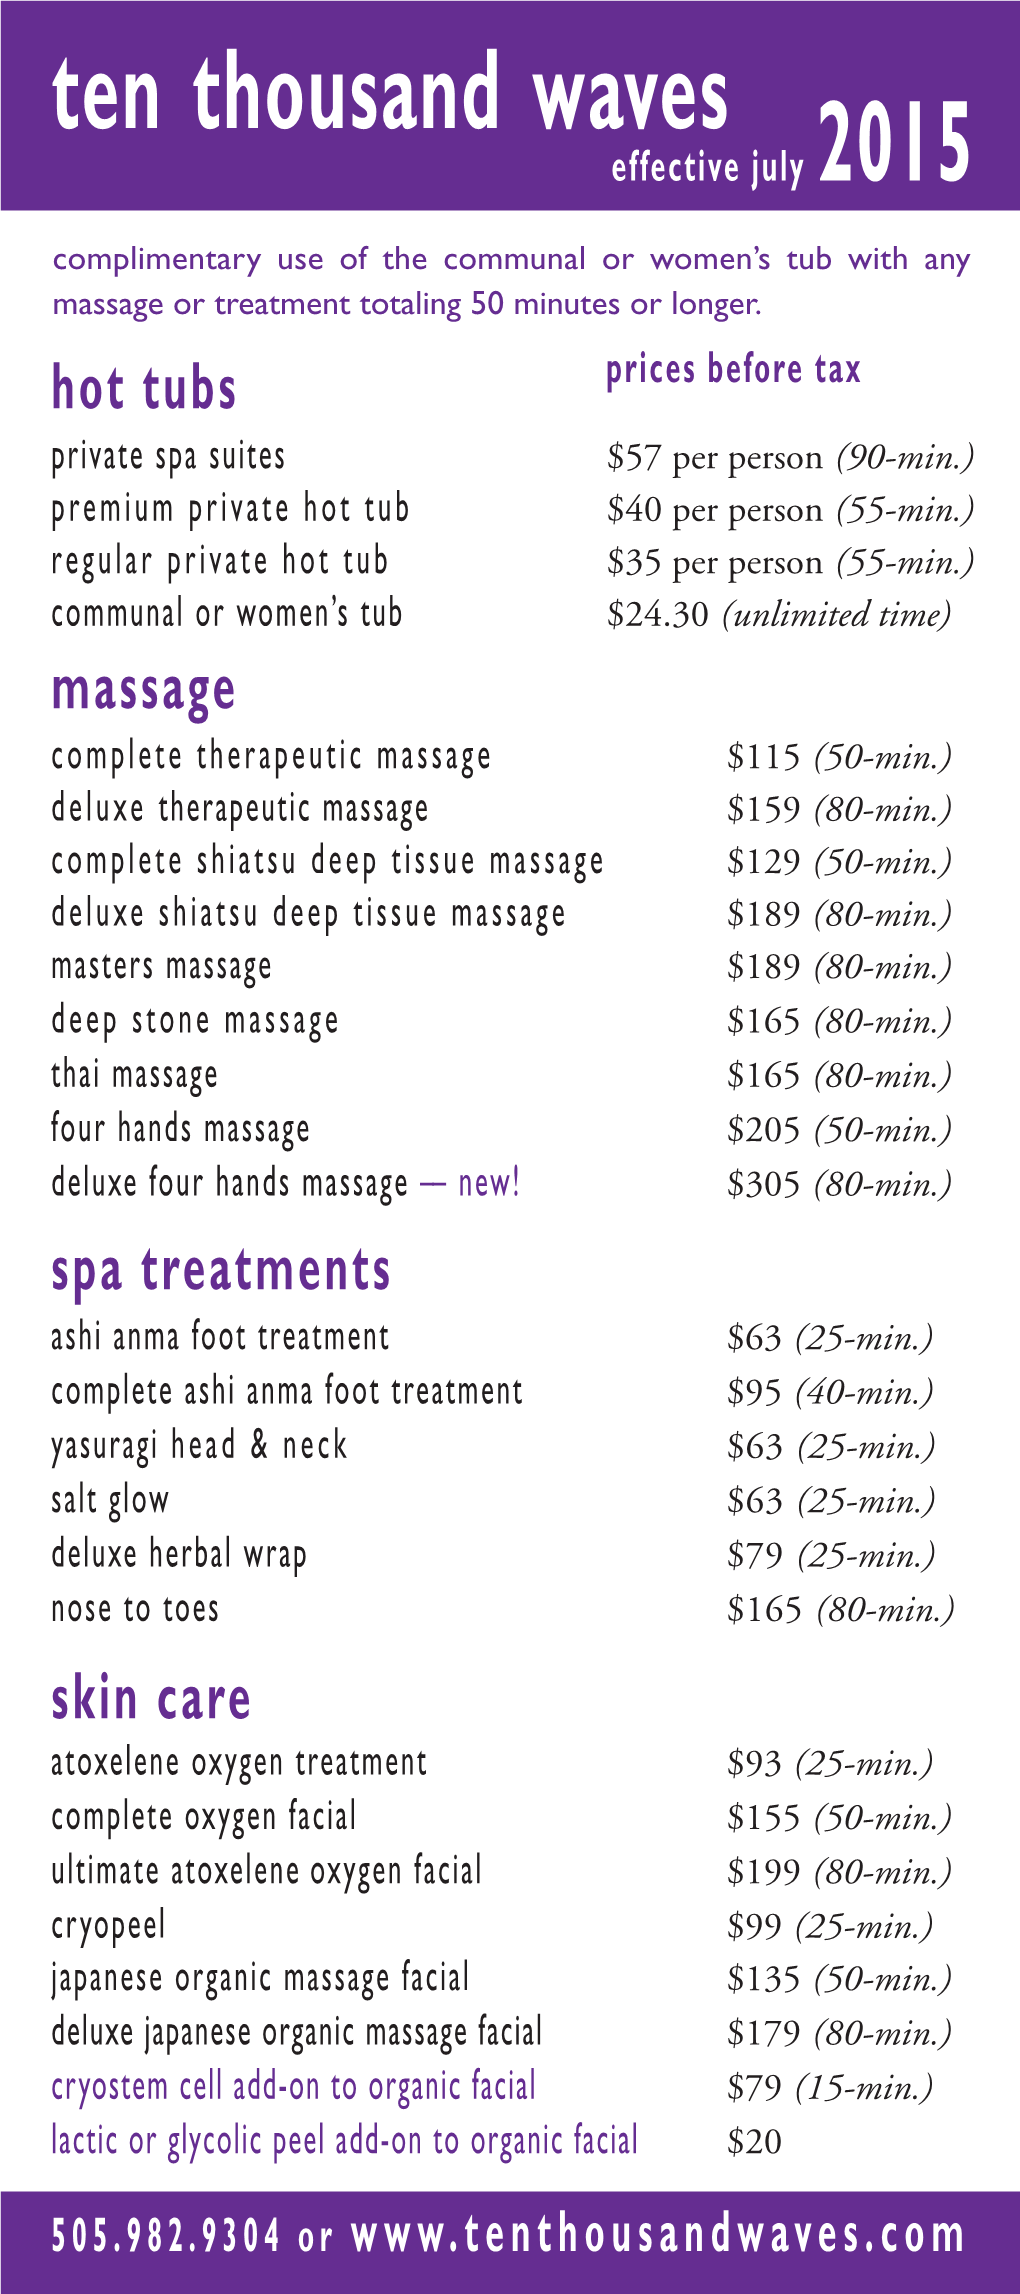 Massage Or Treatment Totaling 50 Minutes Or Longer